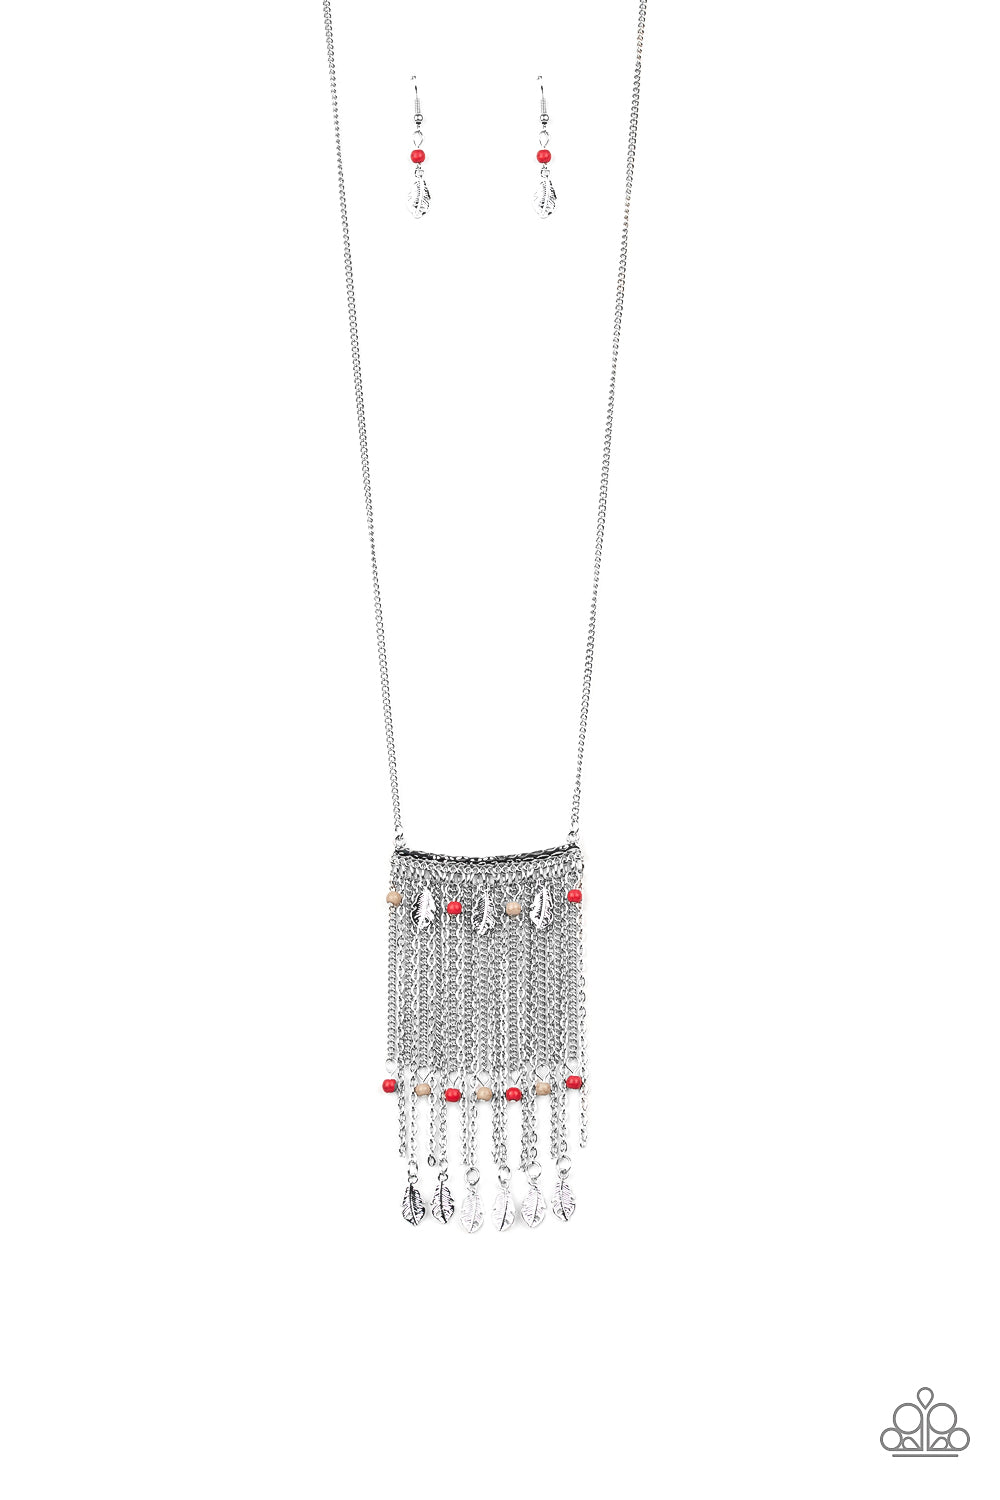 On The Fly - Red Multi Color Necklace - Paparazzi Accessories - Attached to a lengthened silver chain, a hammered silver bar gives way to a fringe of shimmery silver chain, brown and red stone beads, and silver feather frames for a seasonal look. Features an adjustable clasp closure. Sold as one individual necklace. 